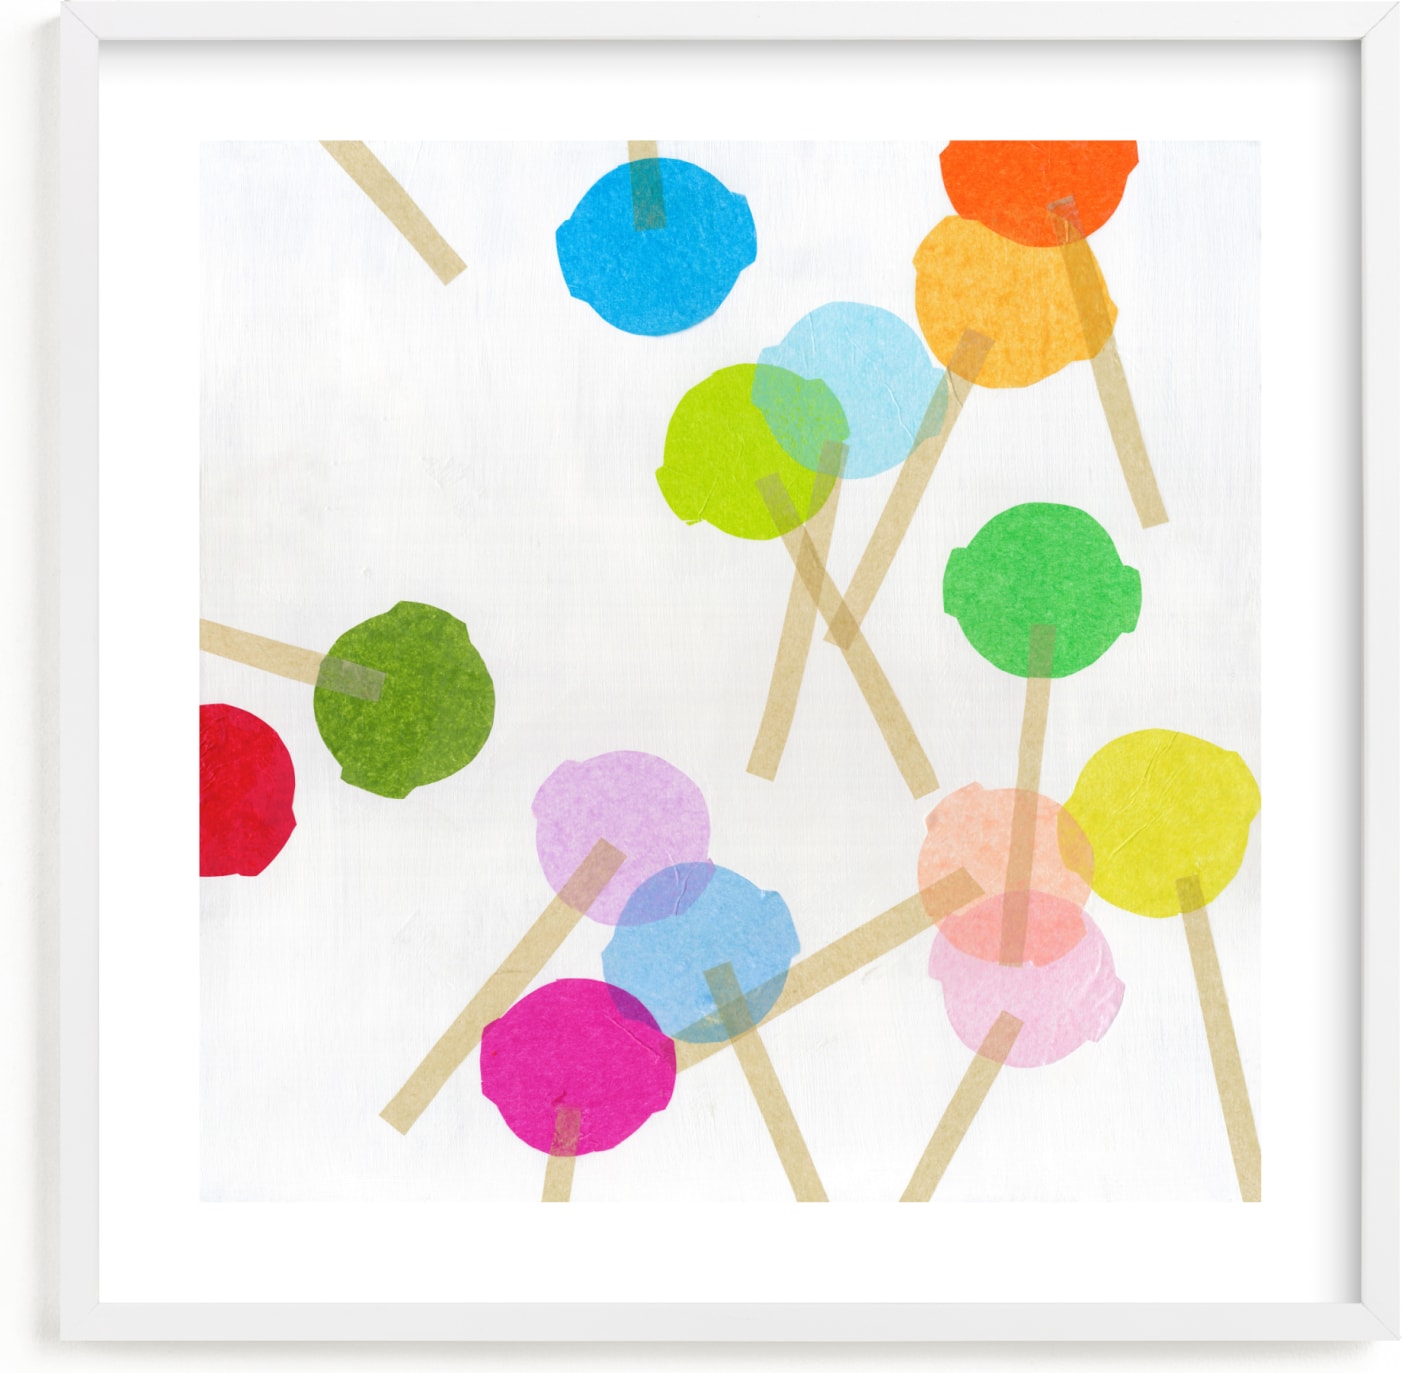 This is a colorful kids wall art by Jenny Westenhofer called Rainbow Lollies.